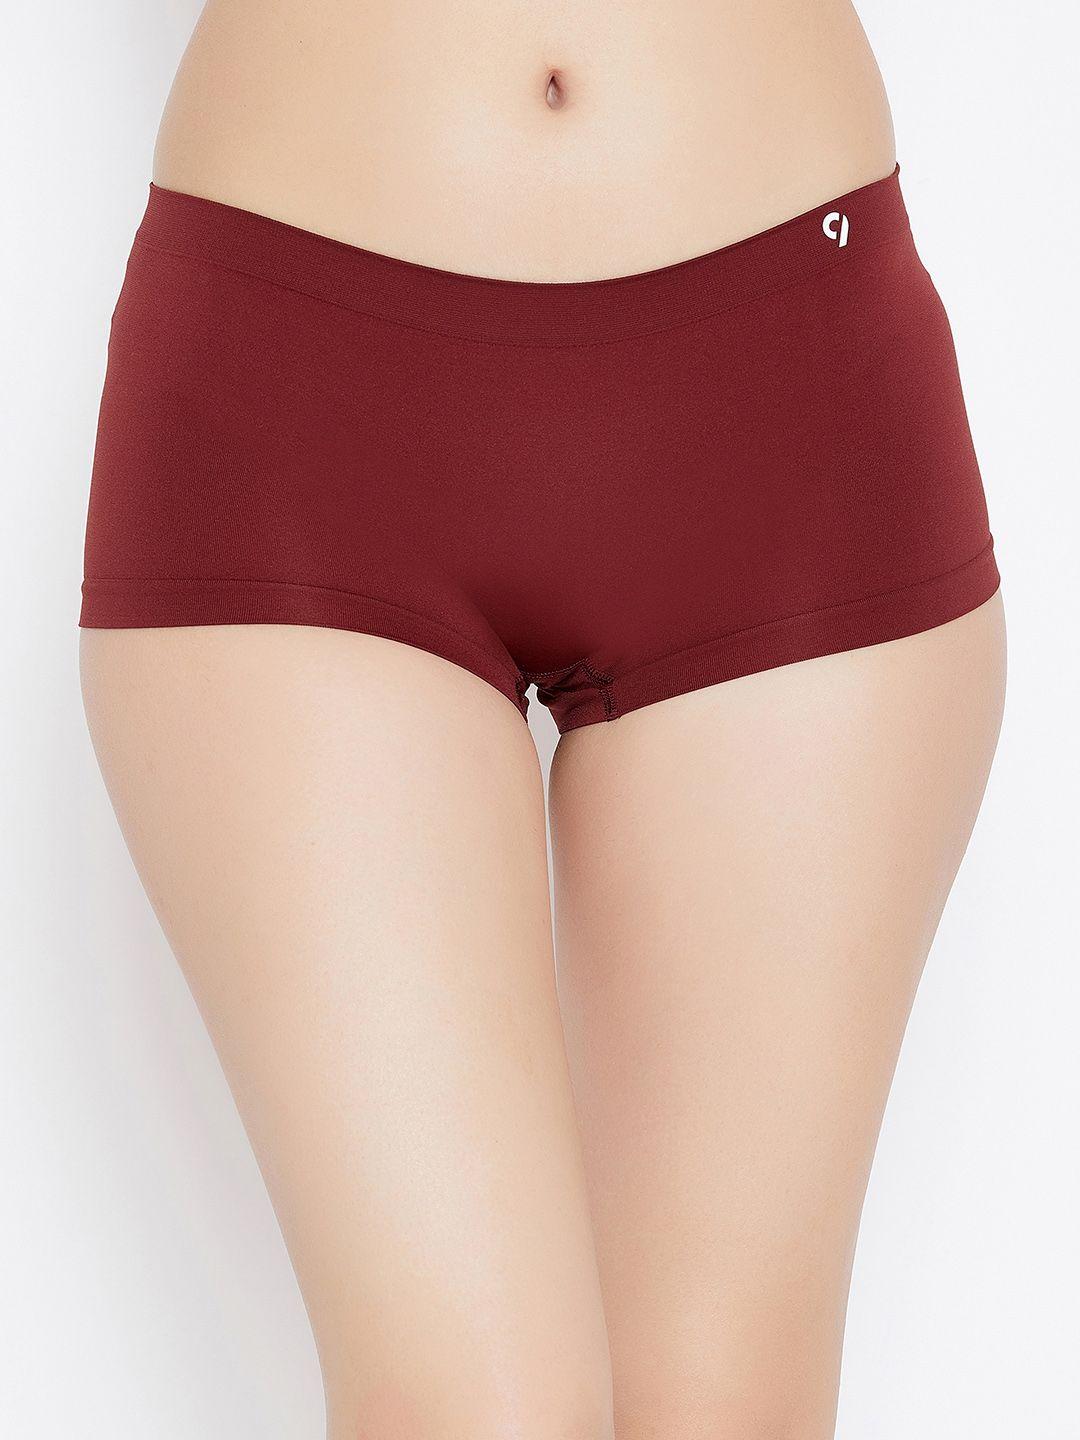 c9-airwear-women-pack-of-2-solid-boy-shorts-p1402_pack8